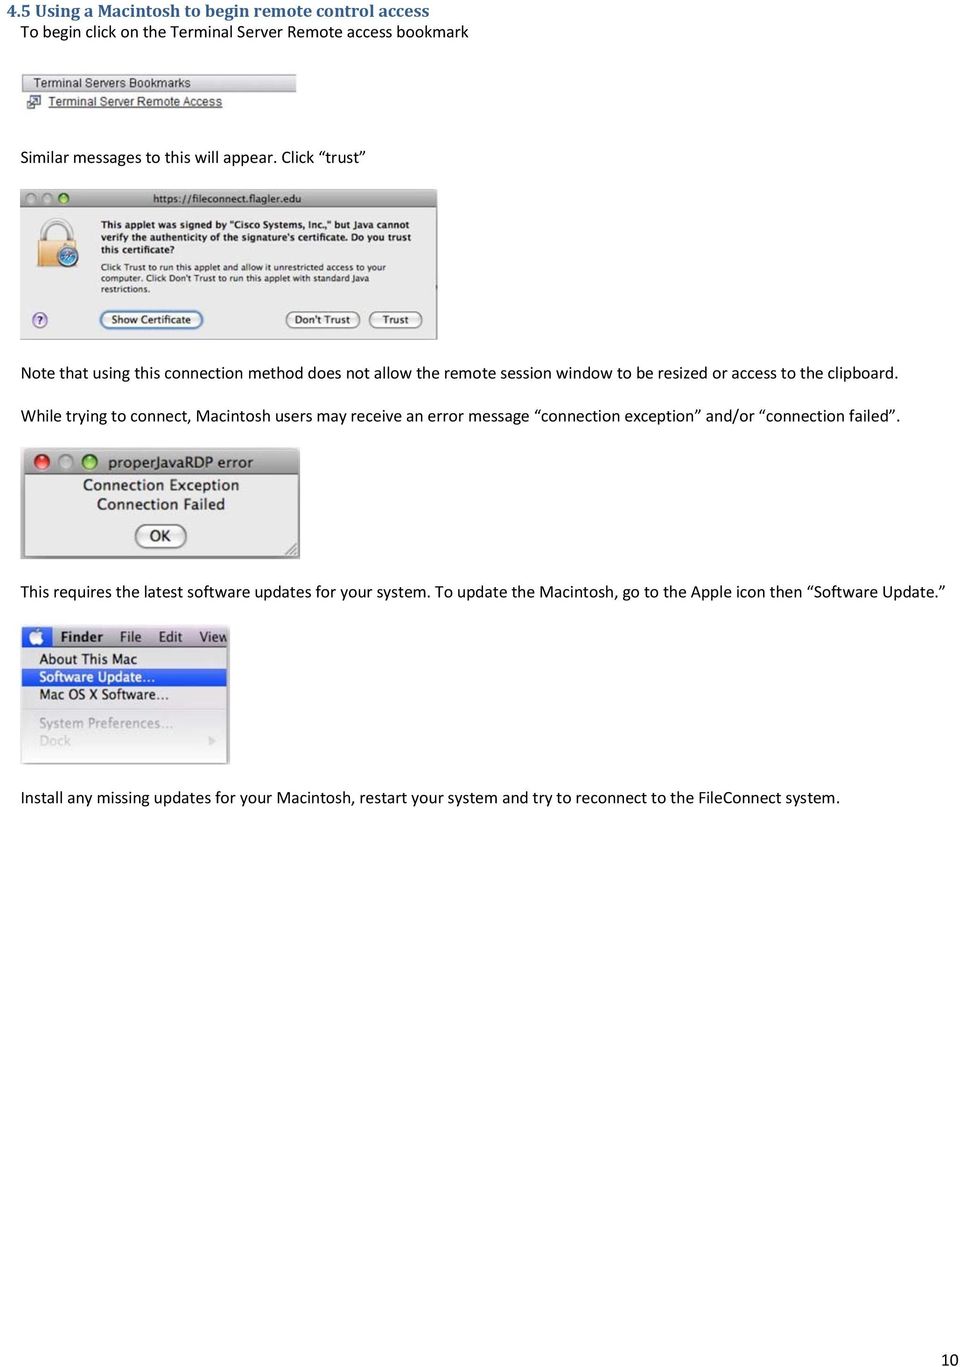 While trying to connect, Macintosh users may receive an error message connection exception and/or connection failed.